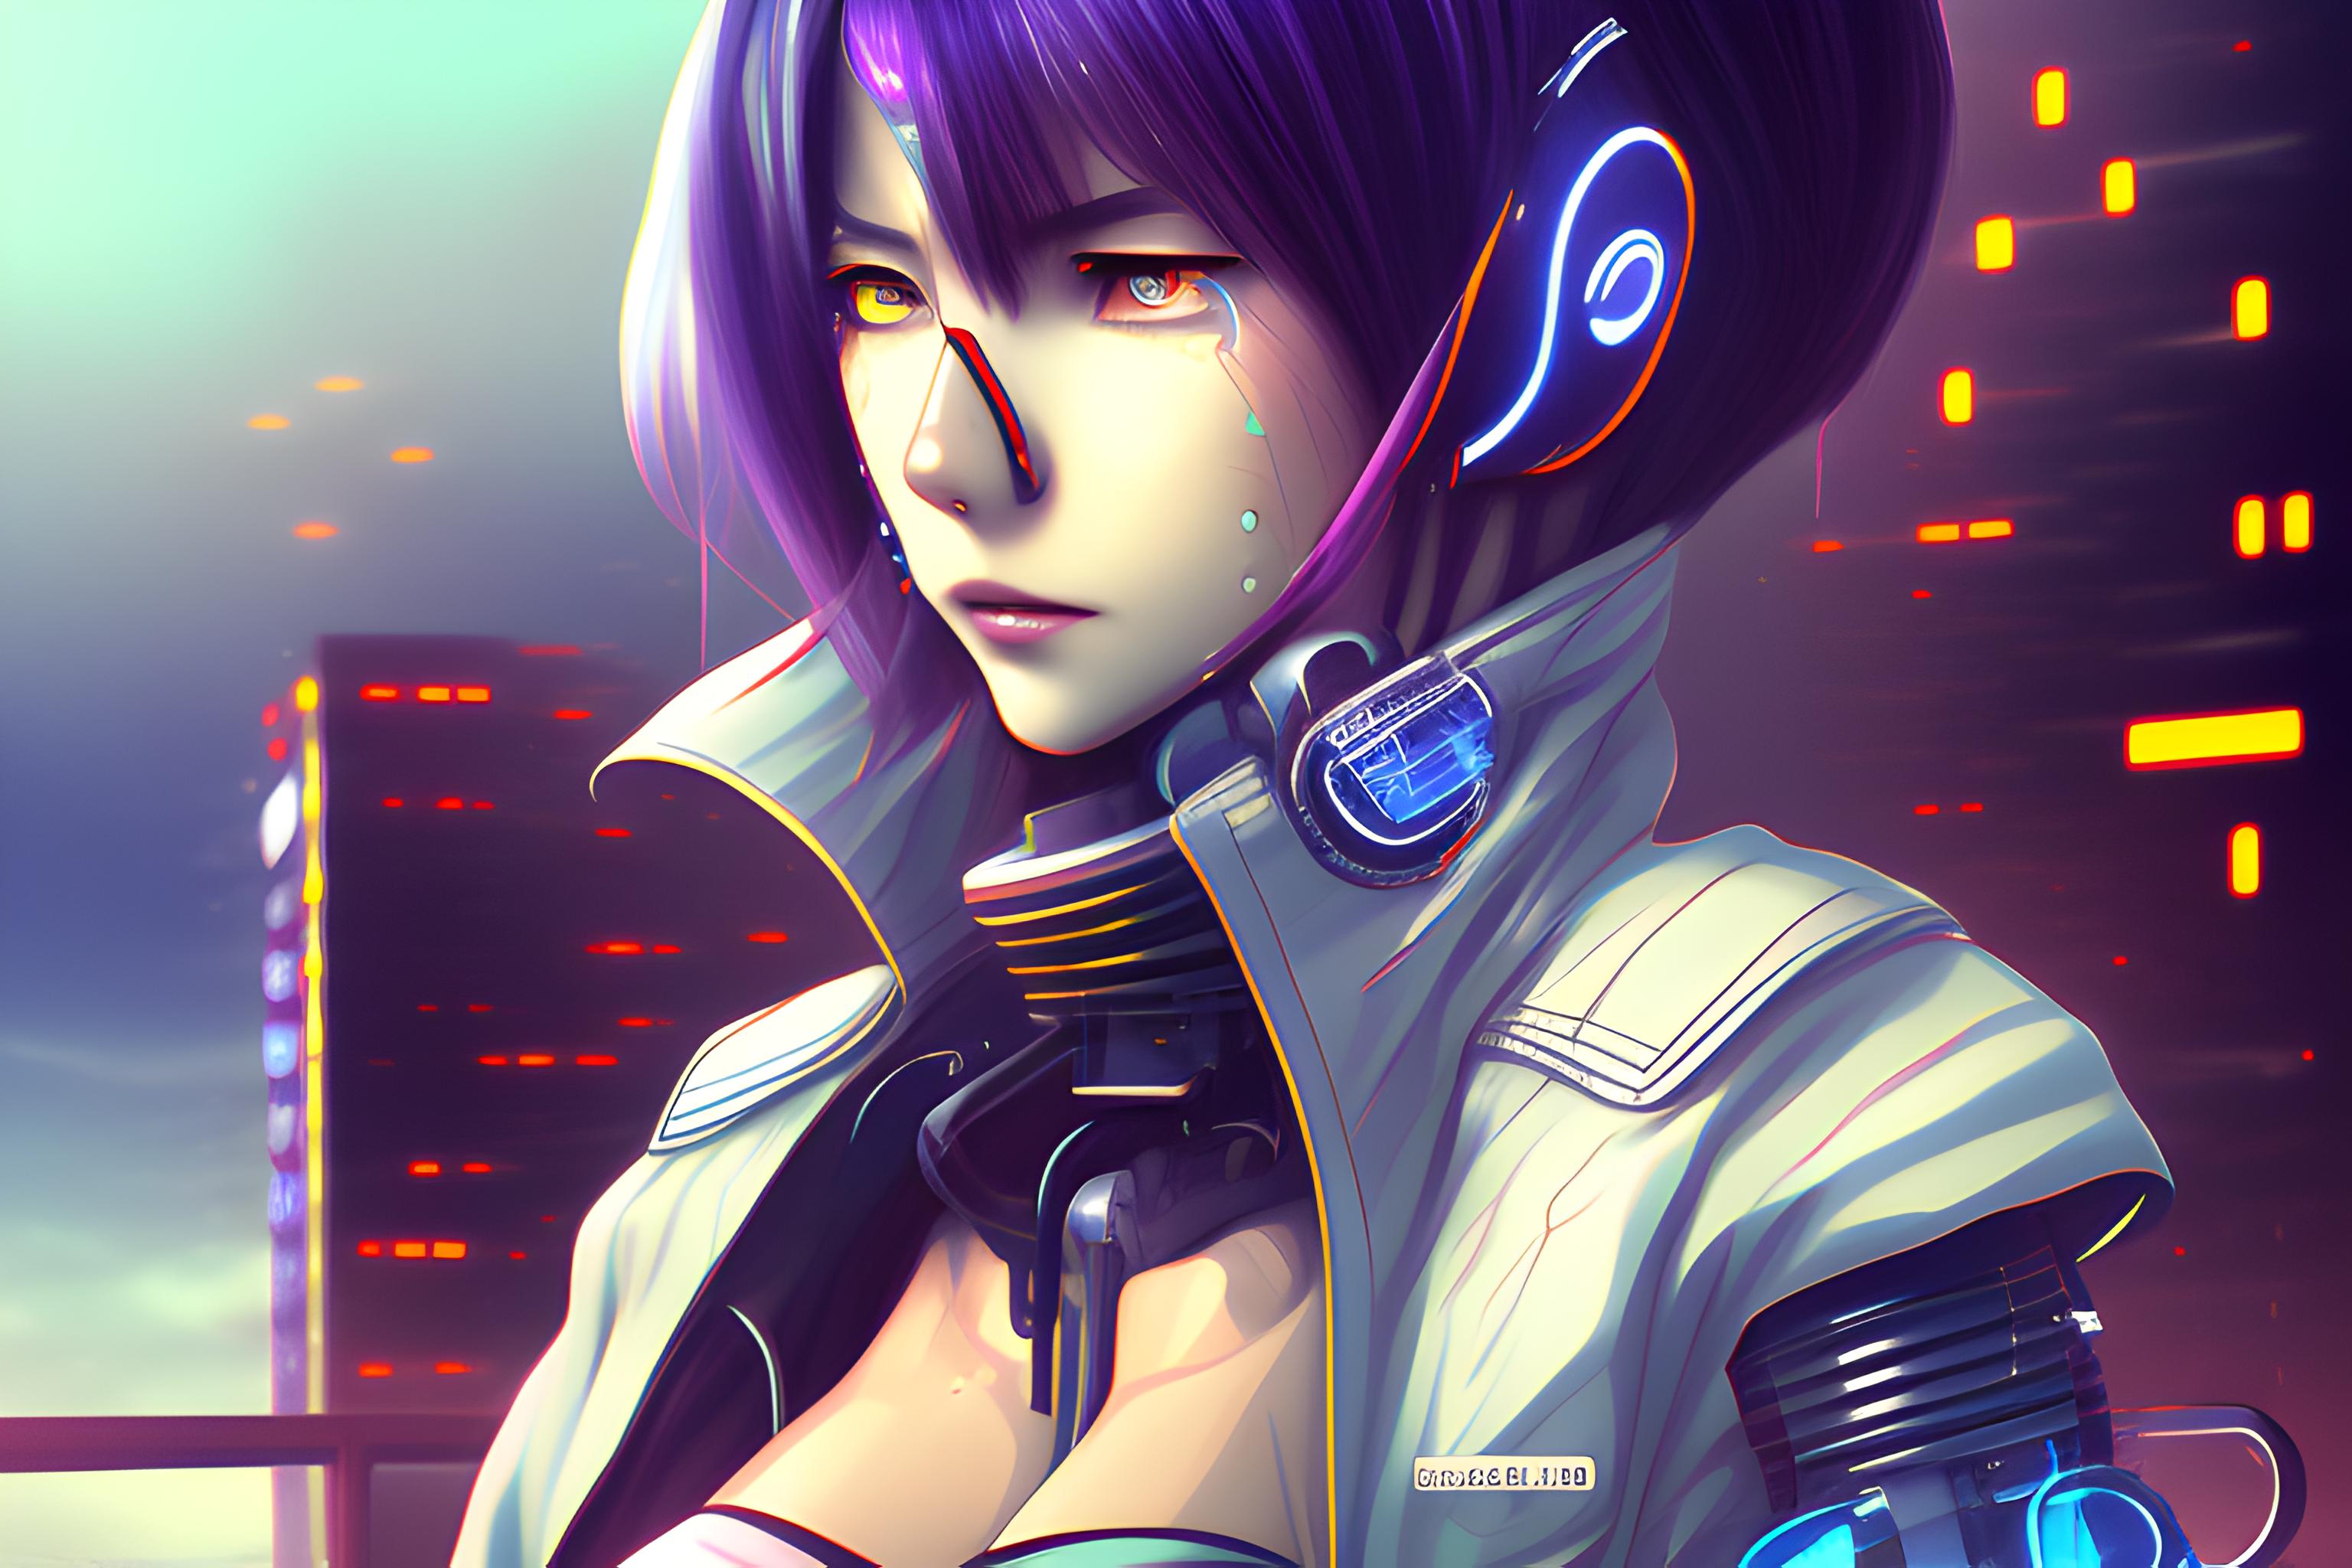 anime key visual of futuristic cyber warrior girl, on | Stable Diffusion